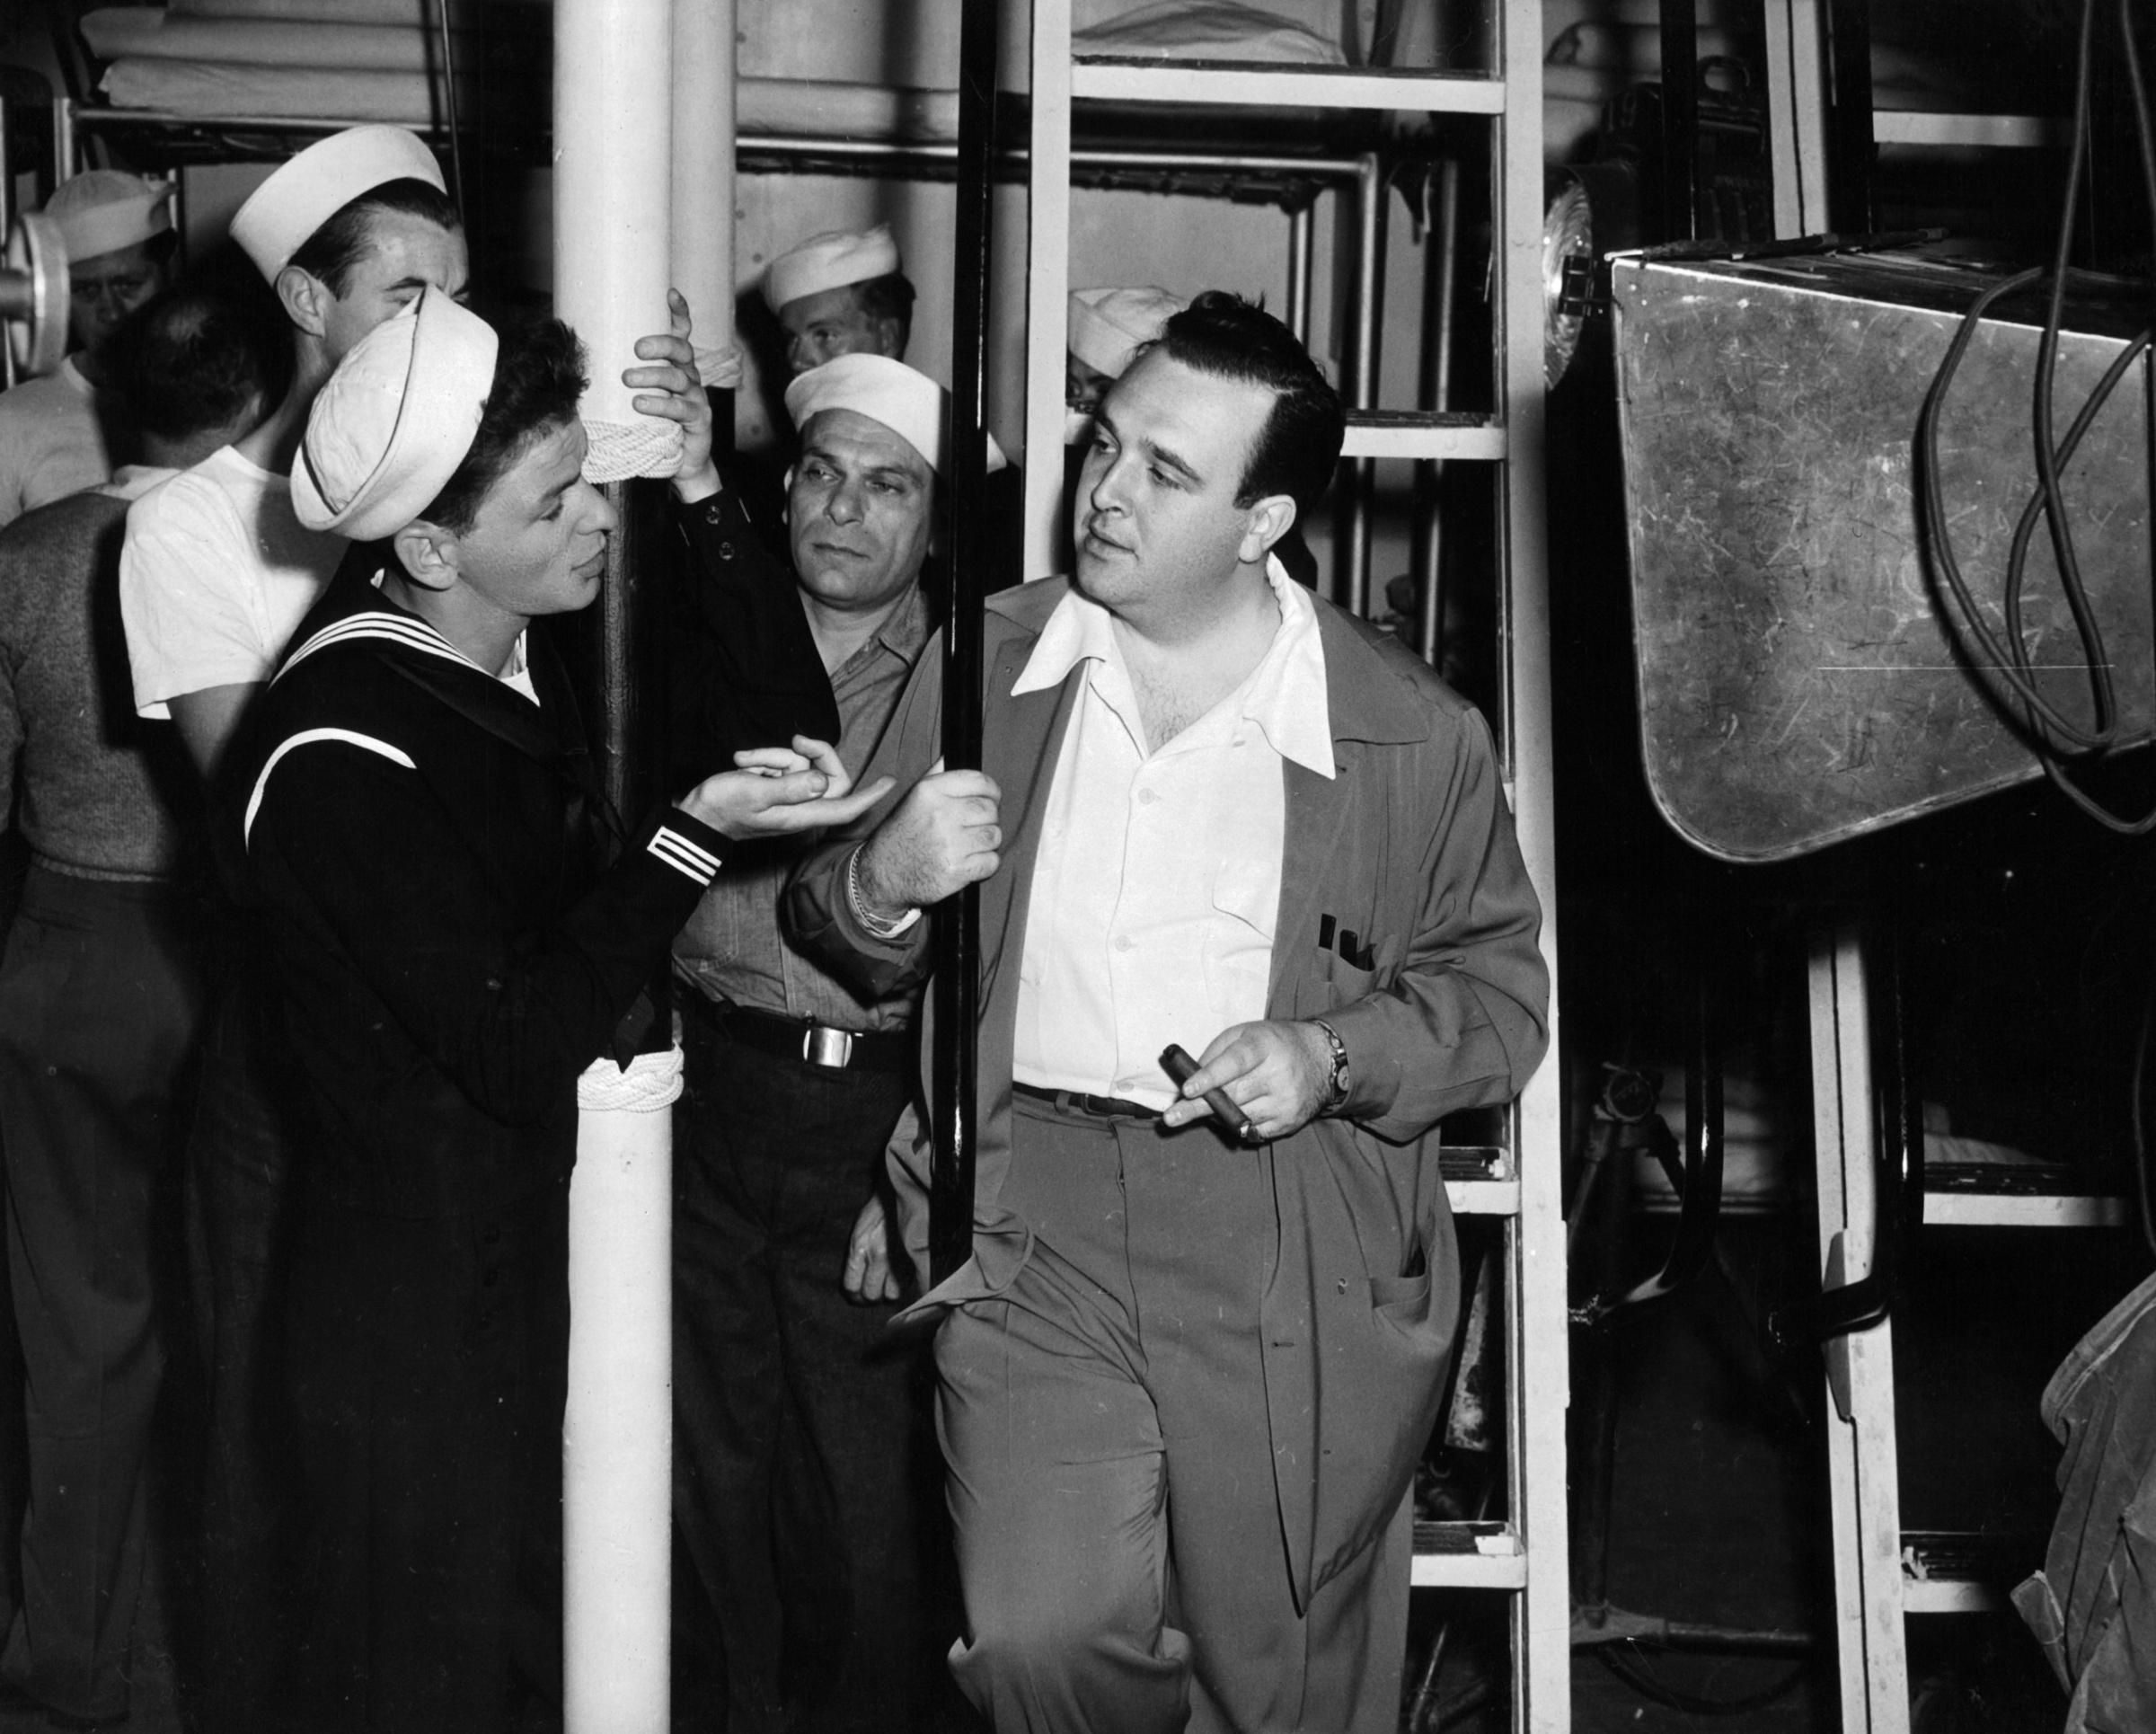 Frank Sinatra having conversation with director George Sidney in between scenes from the film 'Anchors Aweigh', 1945.